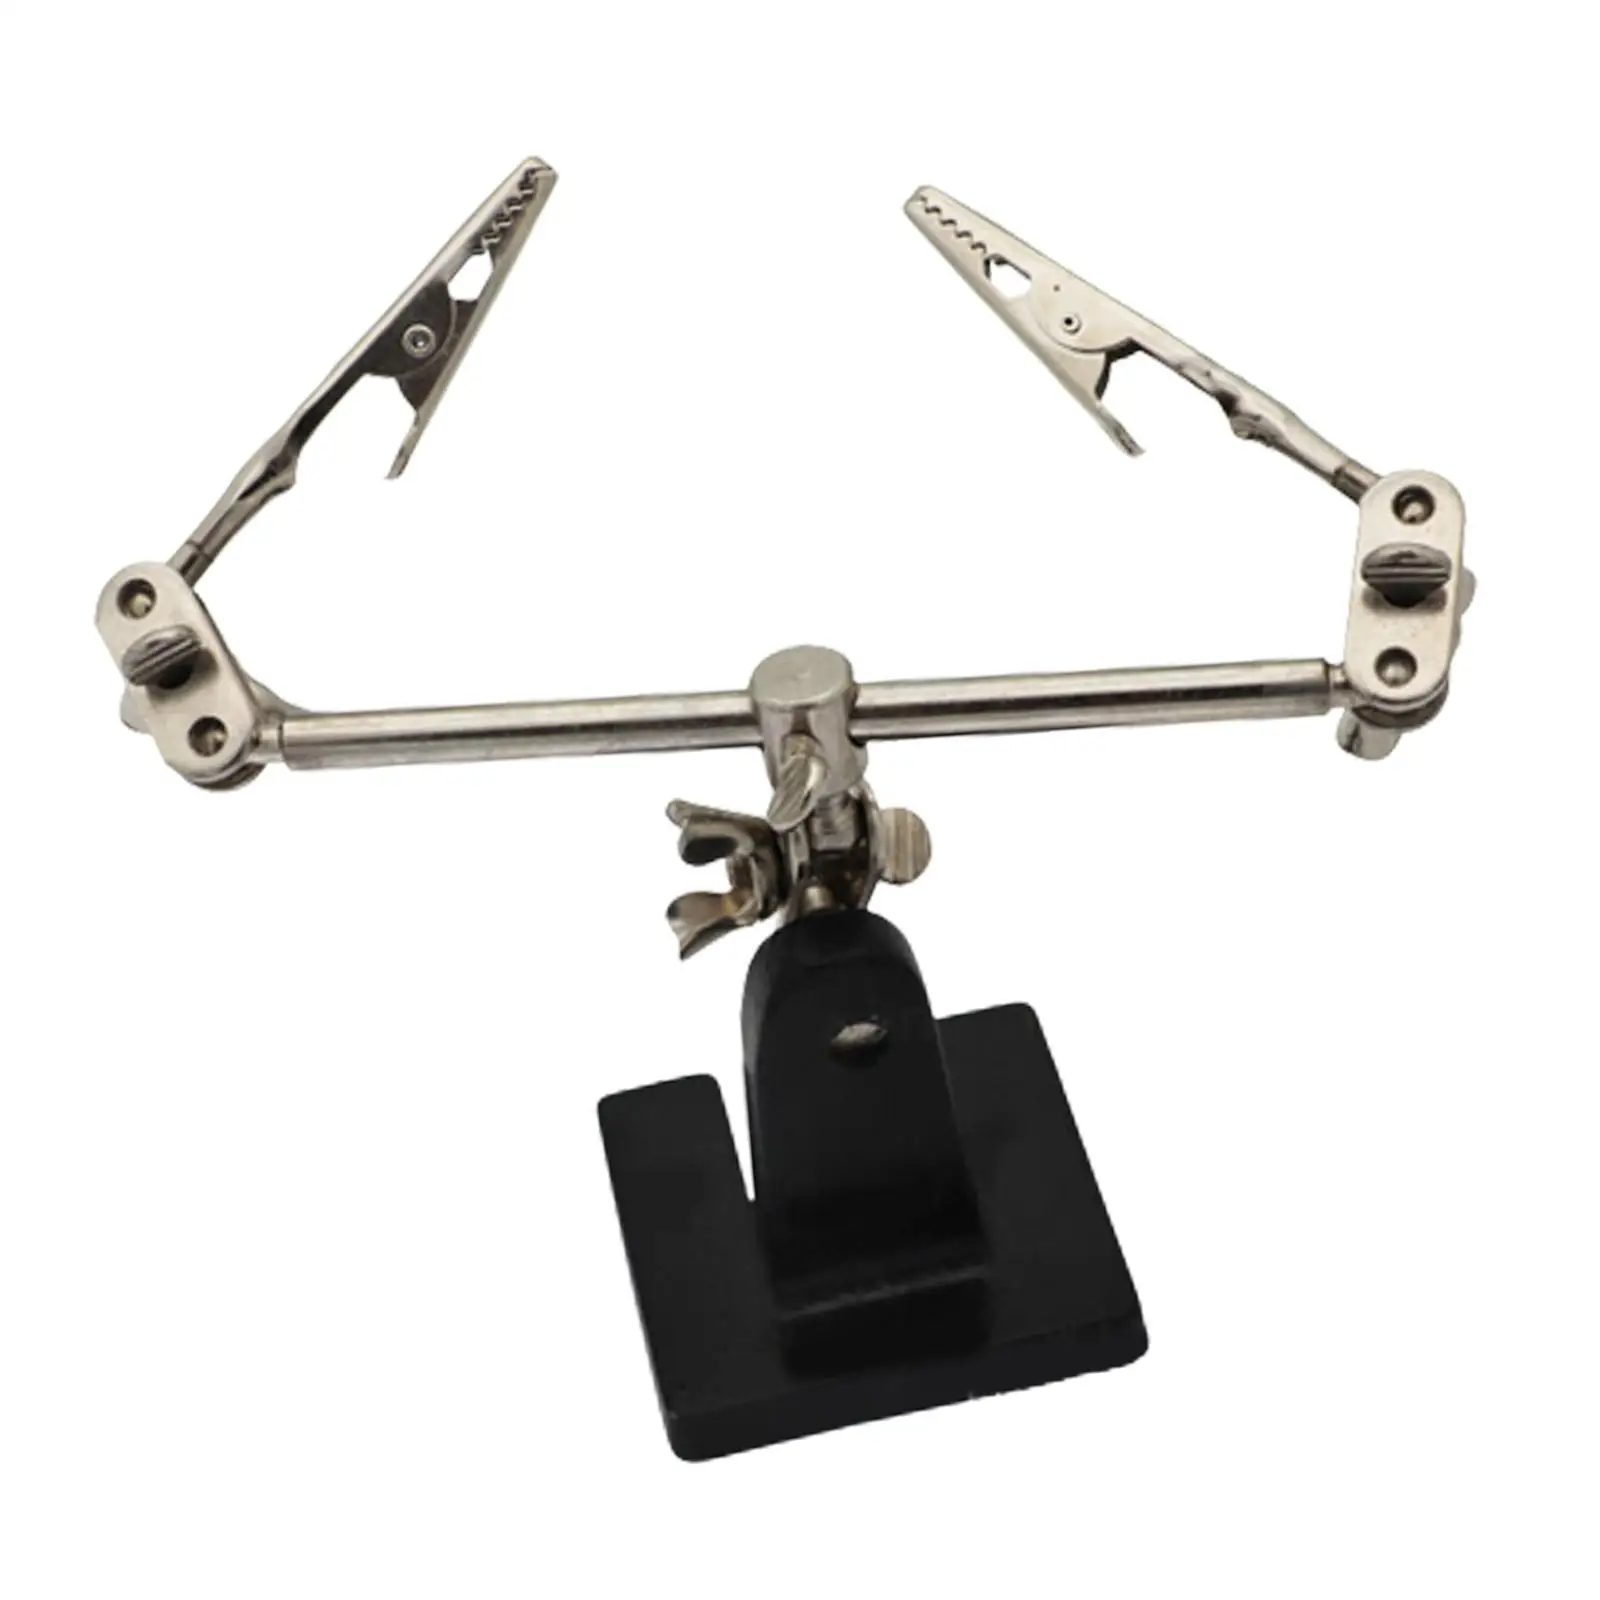 Soldering Third hand metal Stand Clamp Helping Hands for Jewelry Hobby Crafts